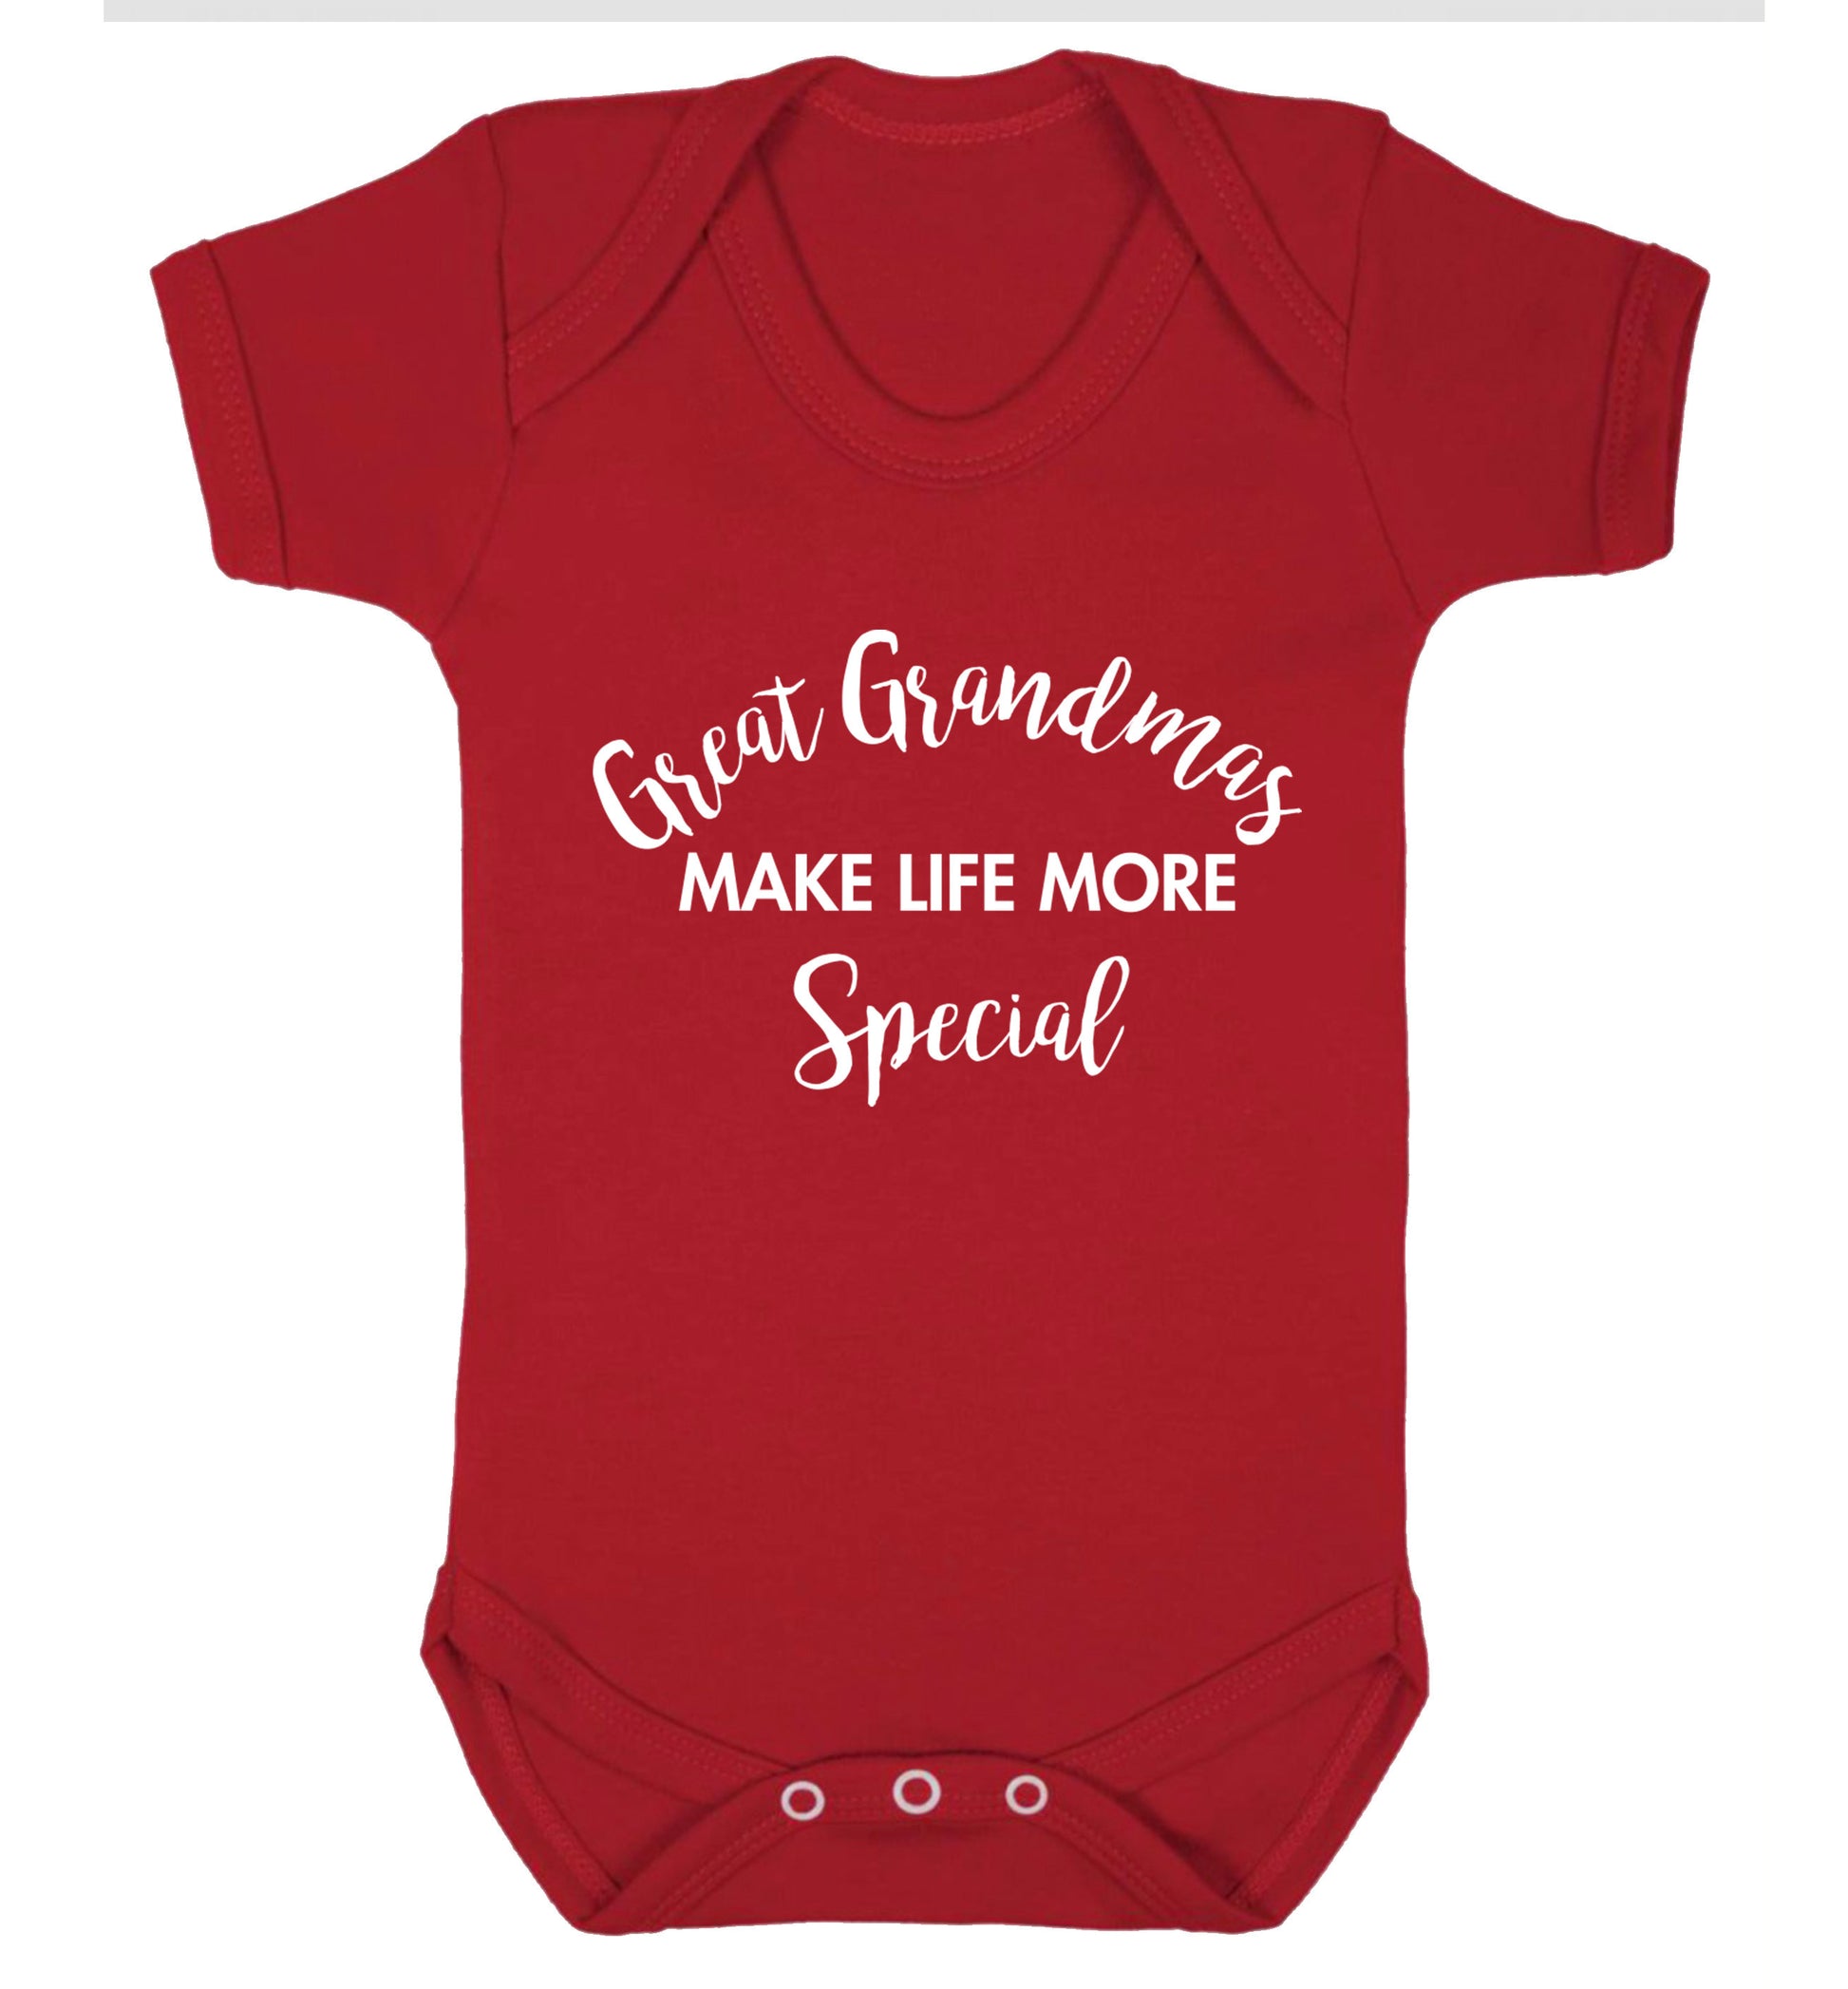 Great Grandmas make life more special Baby Vest red 18-24 months